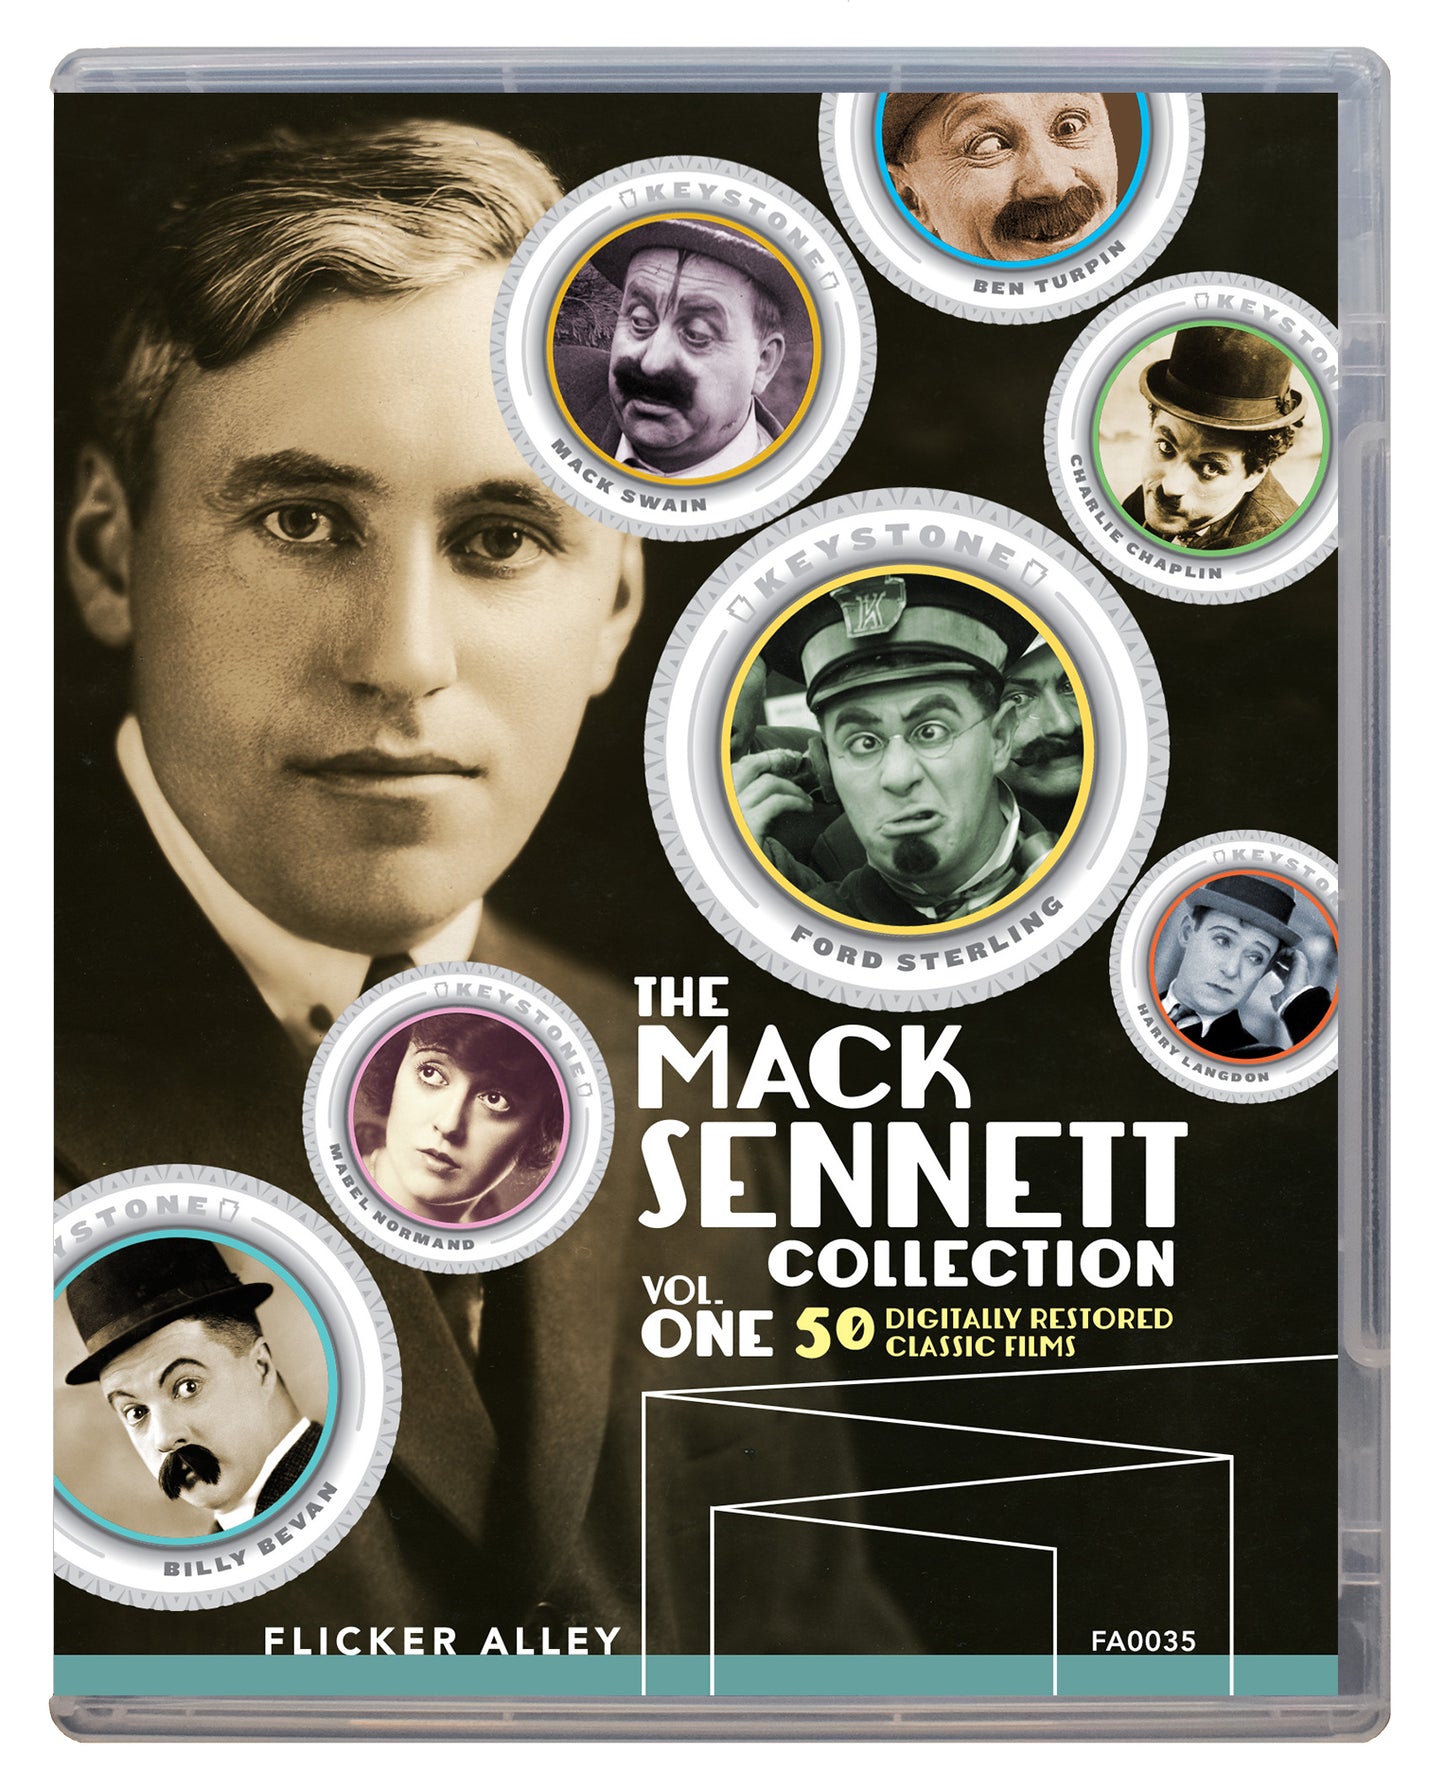 The Mack Sennett Collection, Vol. One